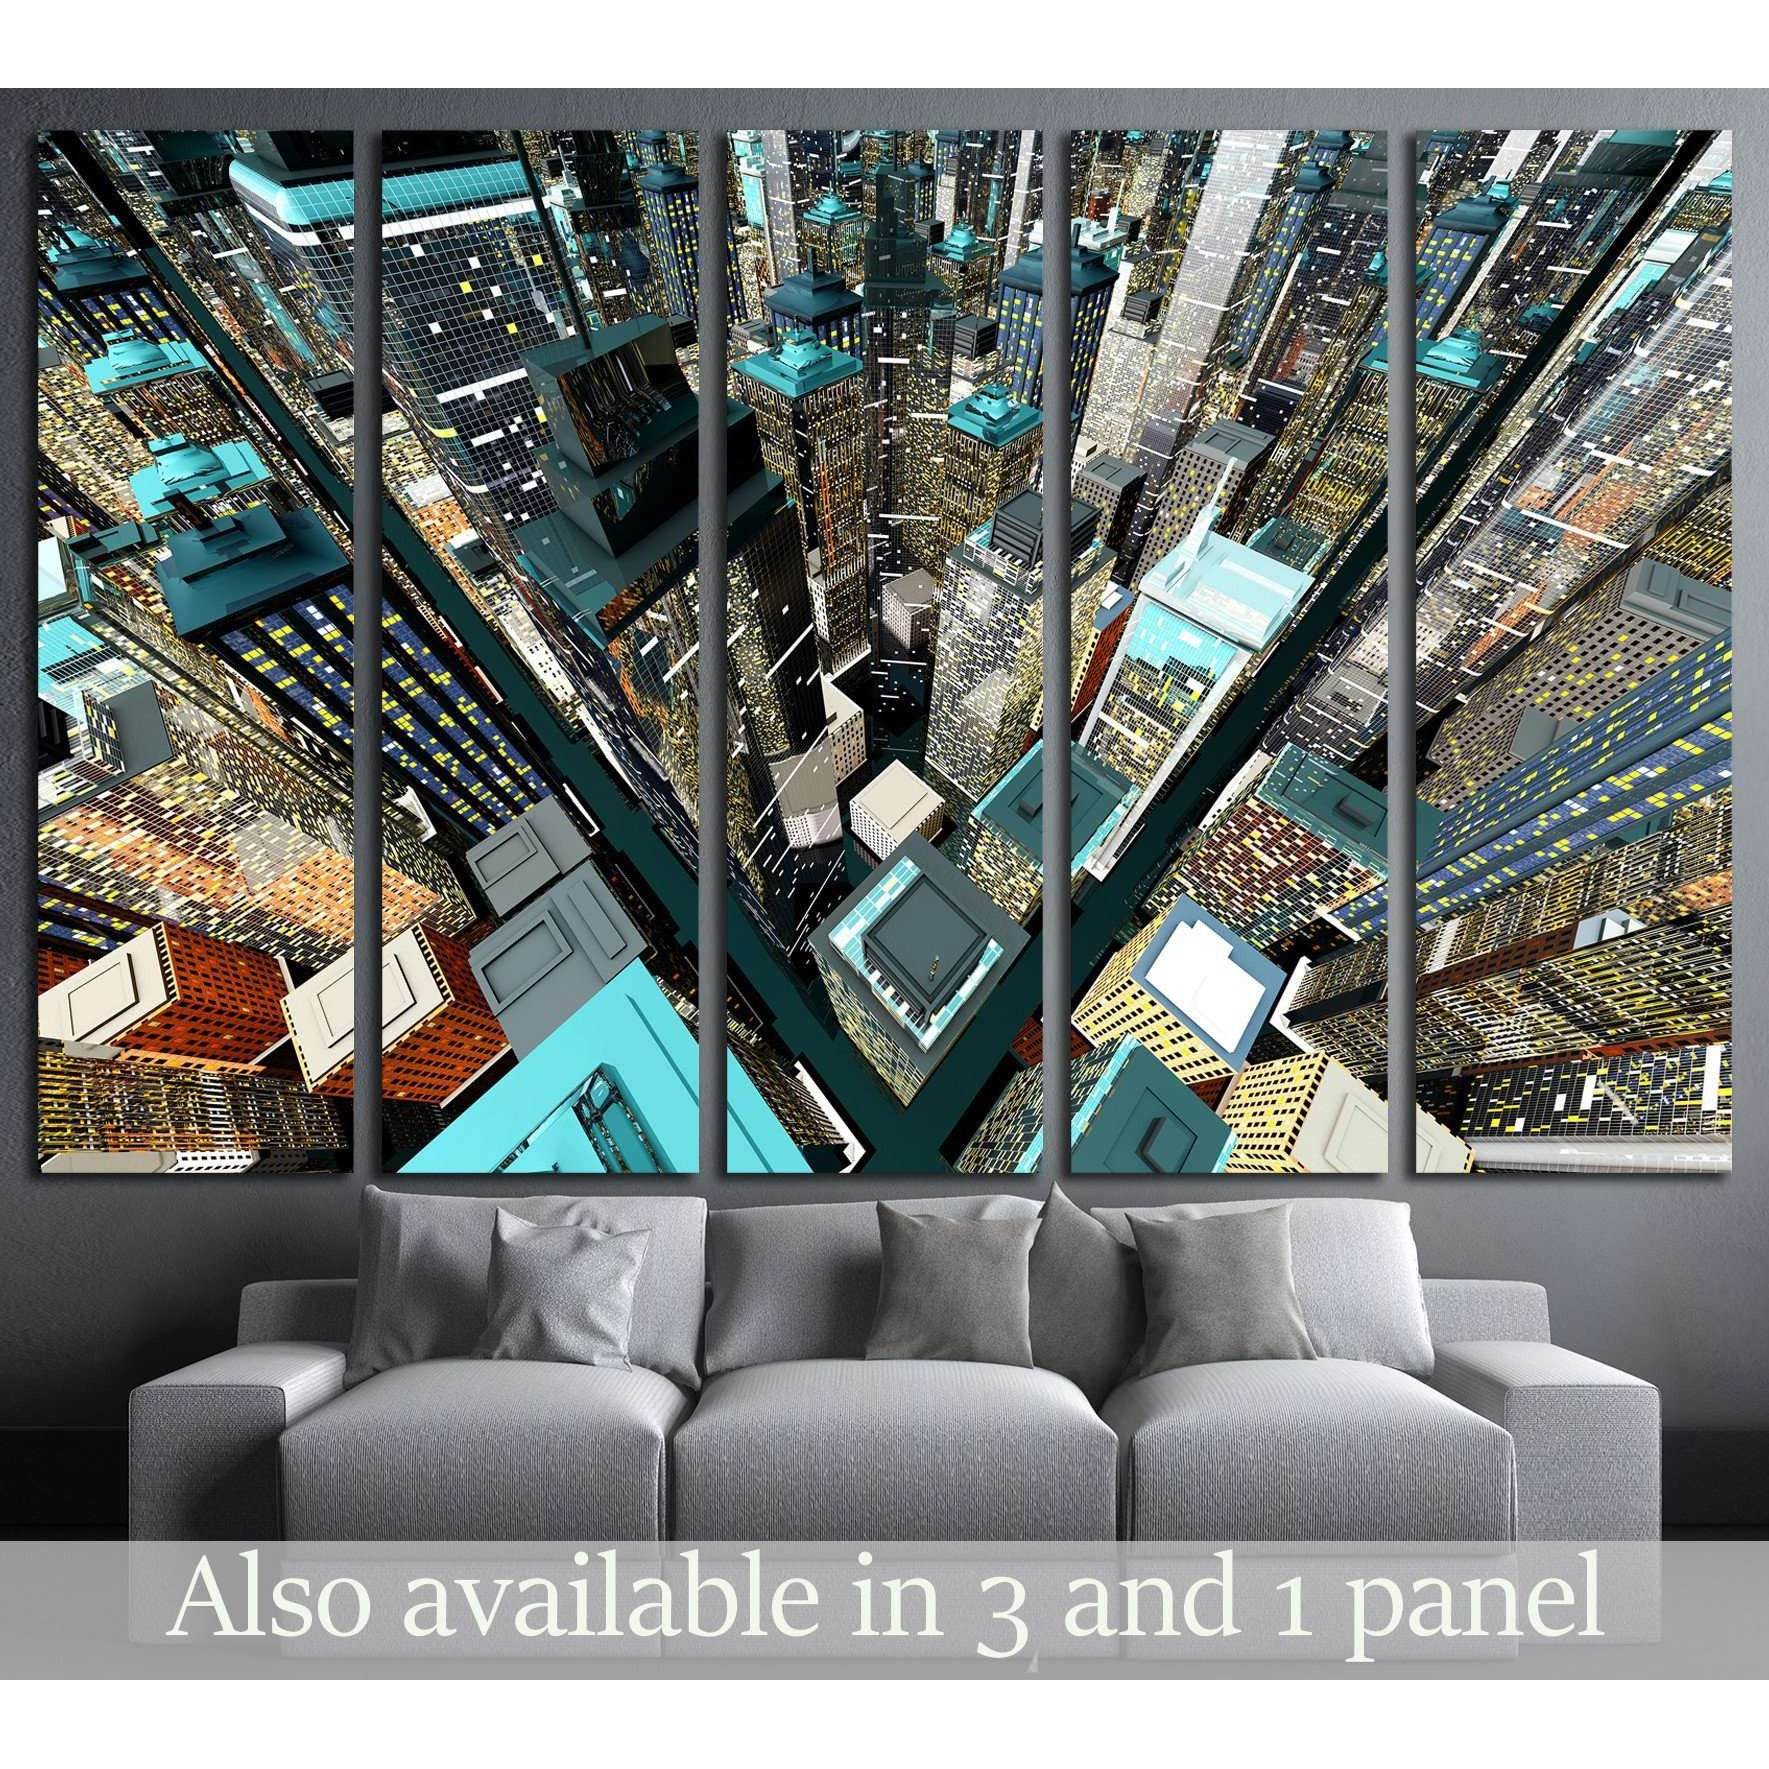 Generic urban architecture and skyscrapers forming a huge city №2048 Ready to Hang Canvas Print